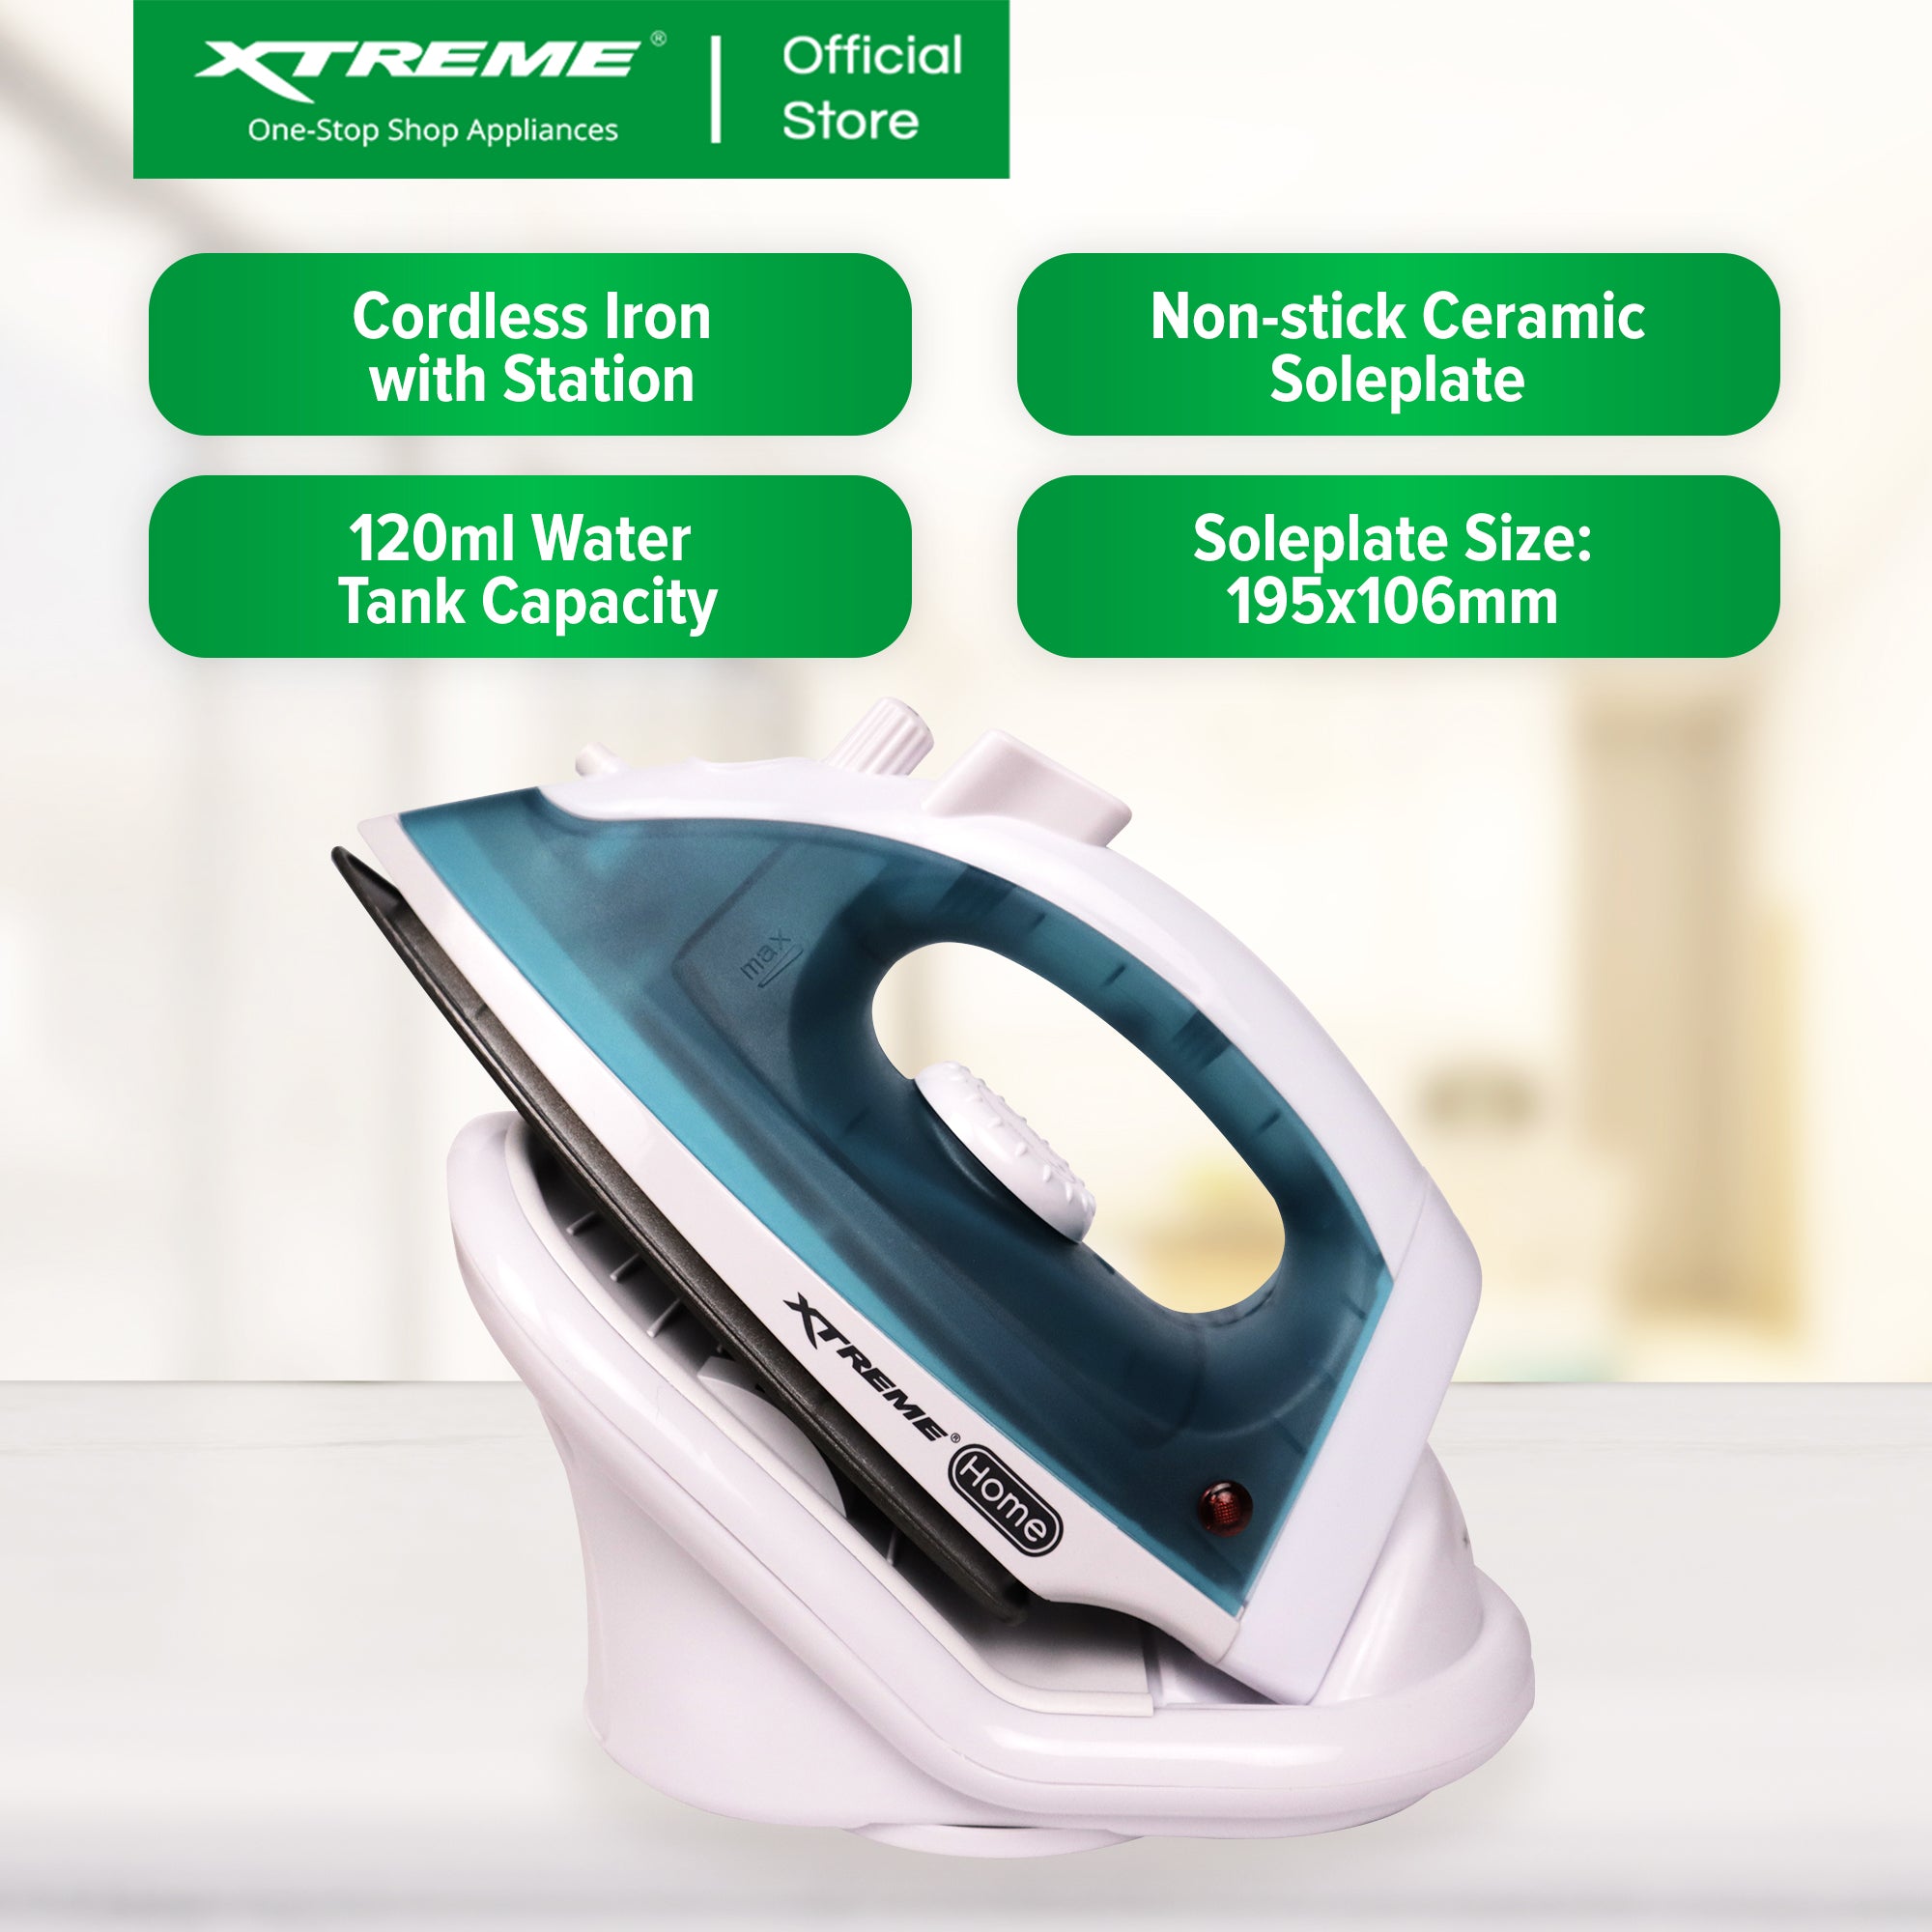 XTREME HOME Cordless Steam Iron with Spray Ceramic Soleplate & Indicator Light (Blue) | XH-IRONSTEAMBLUE